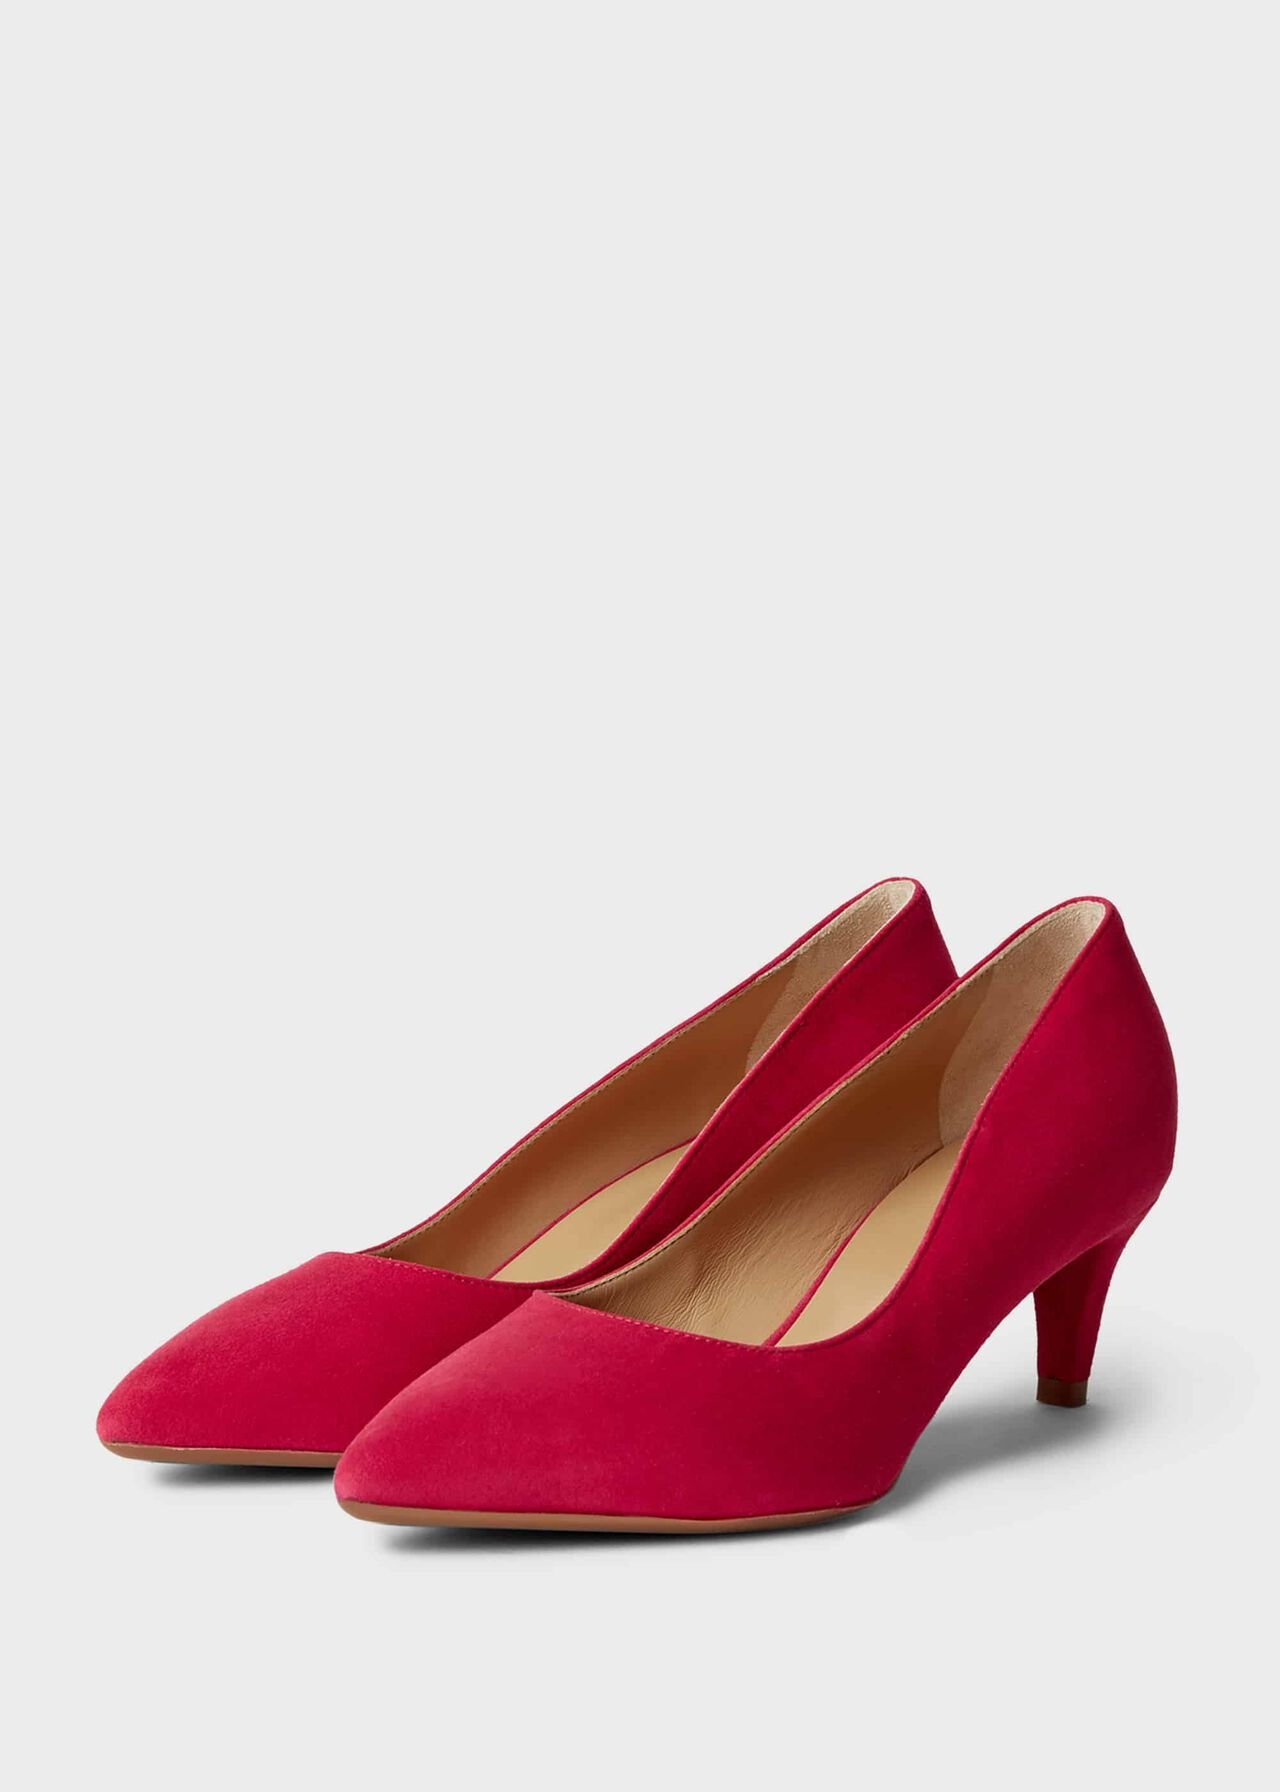 Polly Suede Kitten Heel Court Shoes, Peony, hi-res